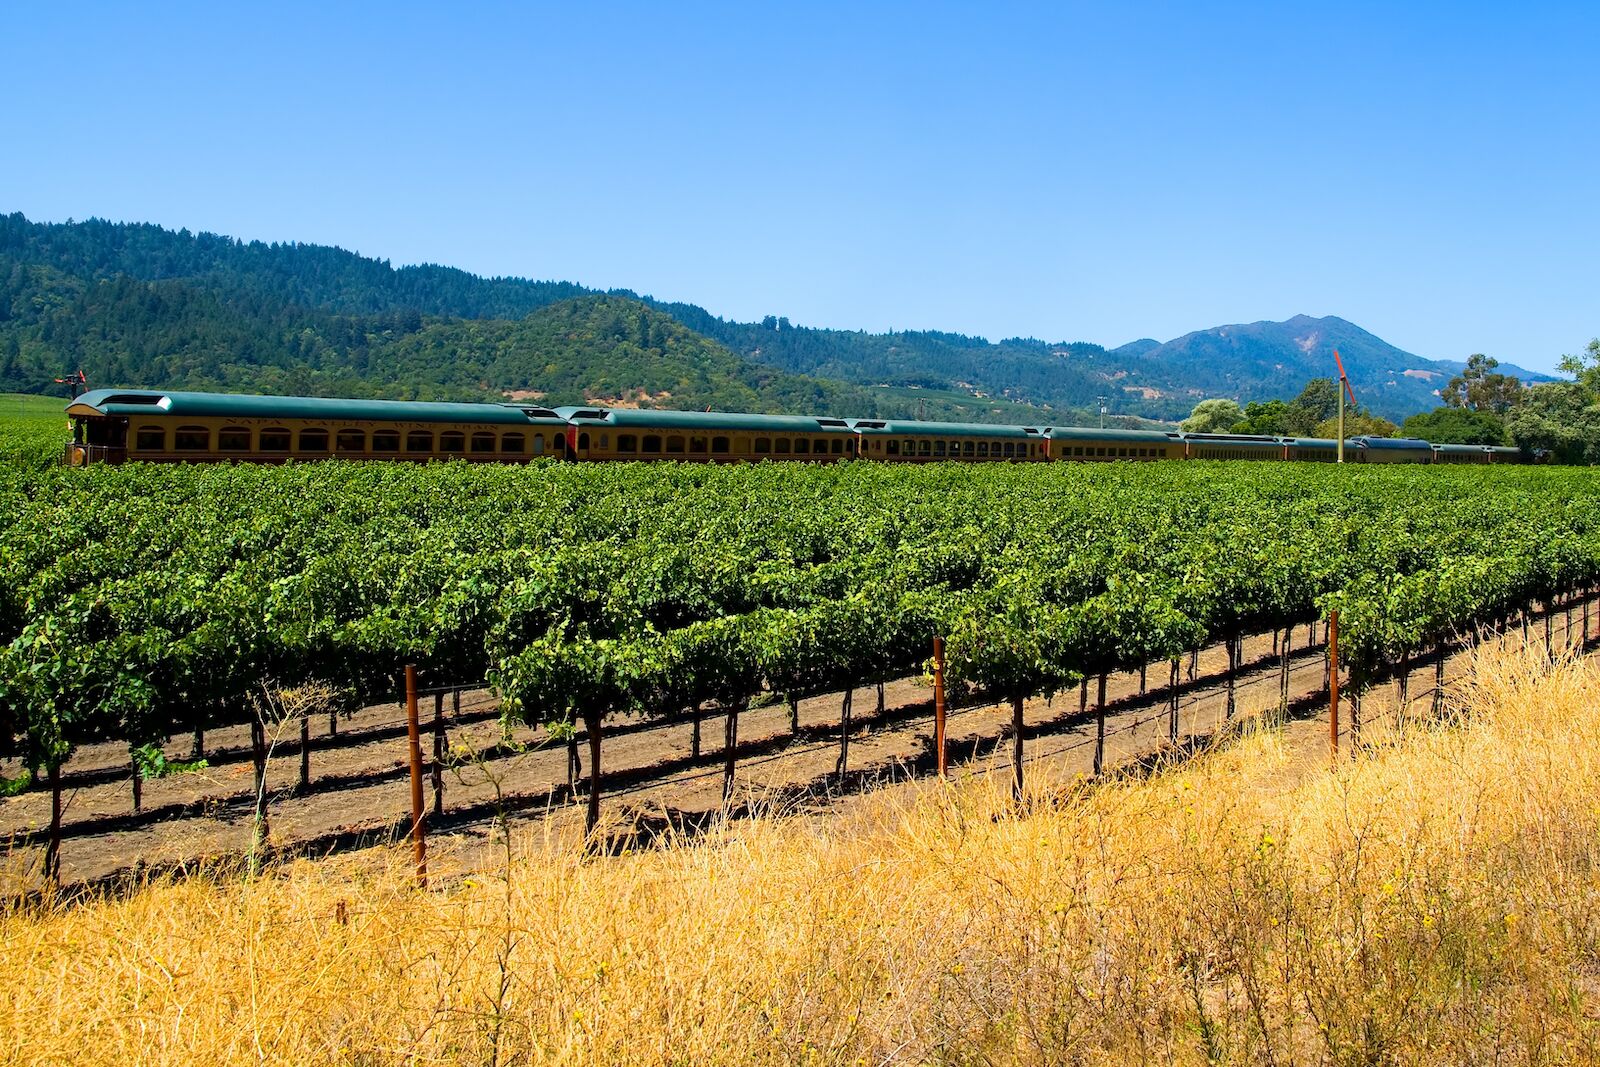 View of the Napa Valley Wine Train running alongside vineyards